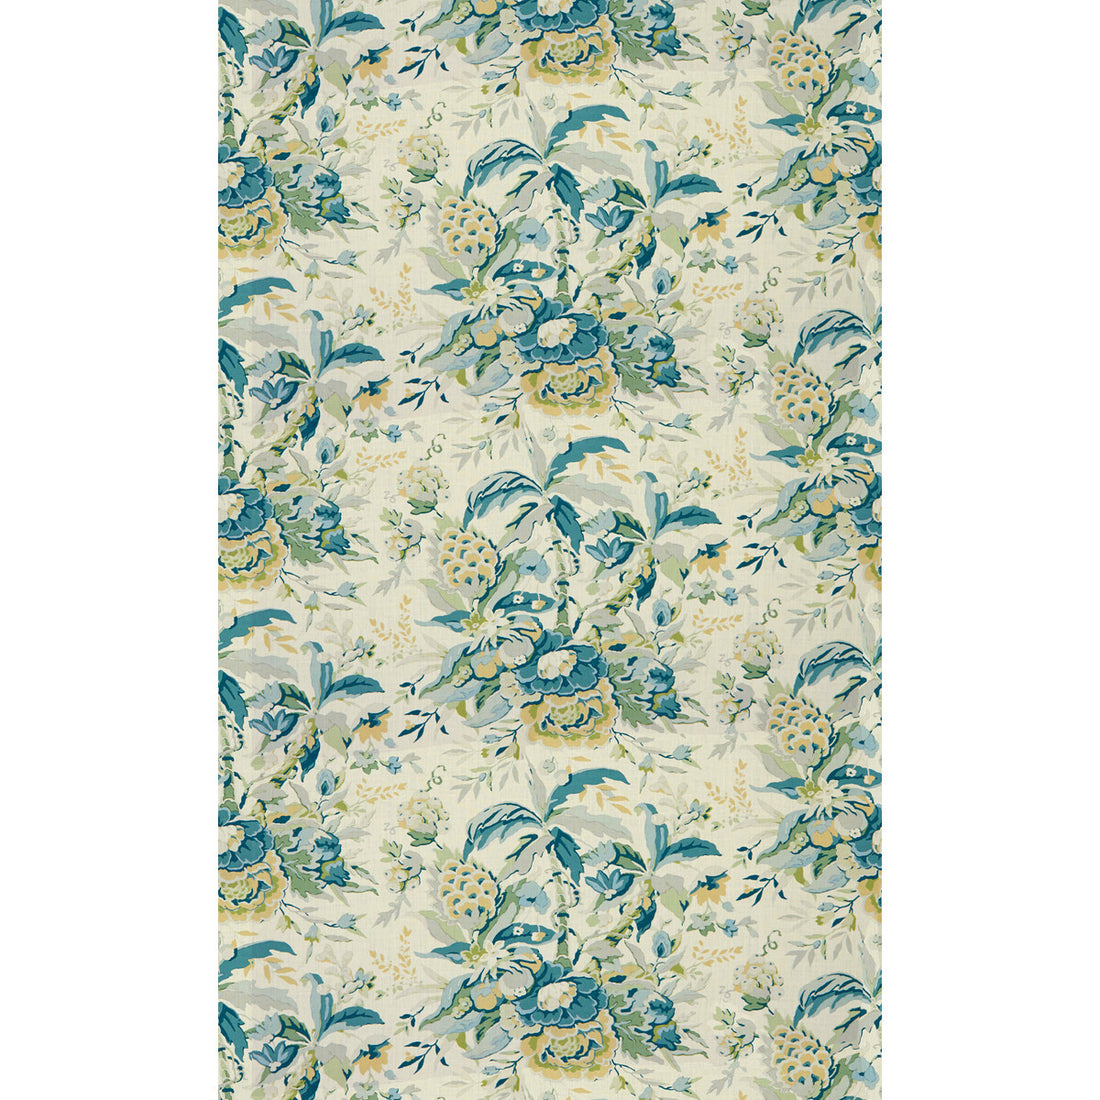 Horseshoe Bay fabric in aqua/green color - pattern 8015108.513.0 - by Brunschwig &amp; Fils in the Les Tropiques collection